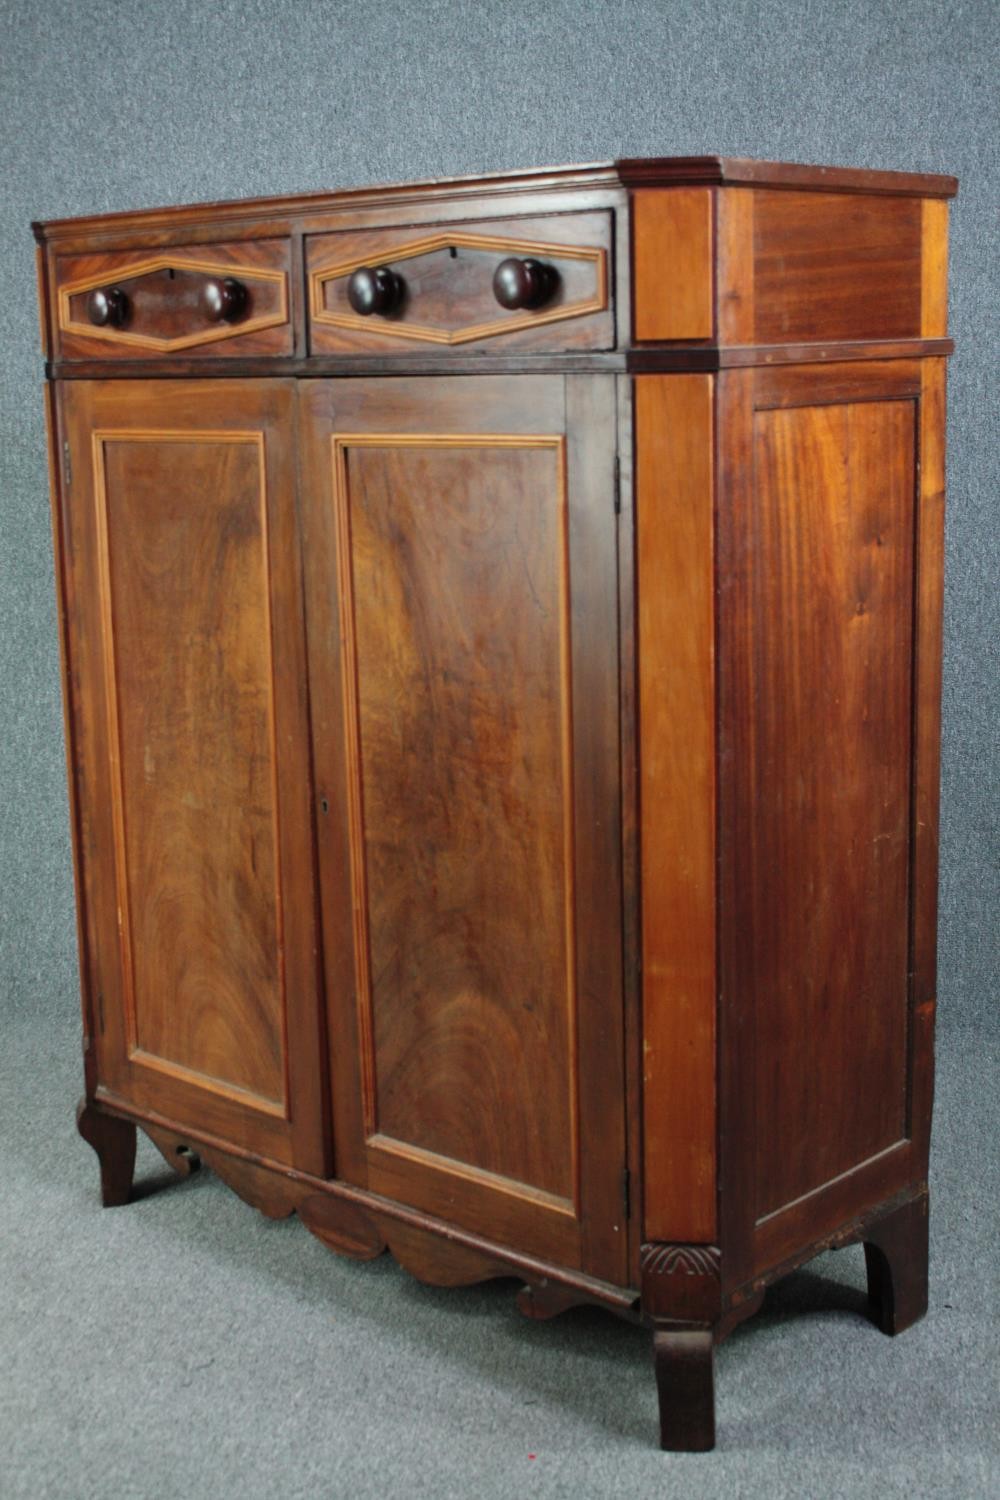 Cabinet, 19th century Continental flame mahogany. H.148 W.124 D.54cm. (Rear leg damaged as shown). - Image 3 of 6